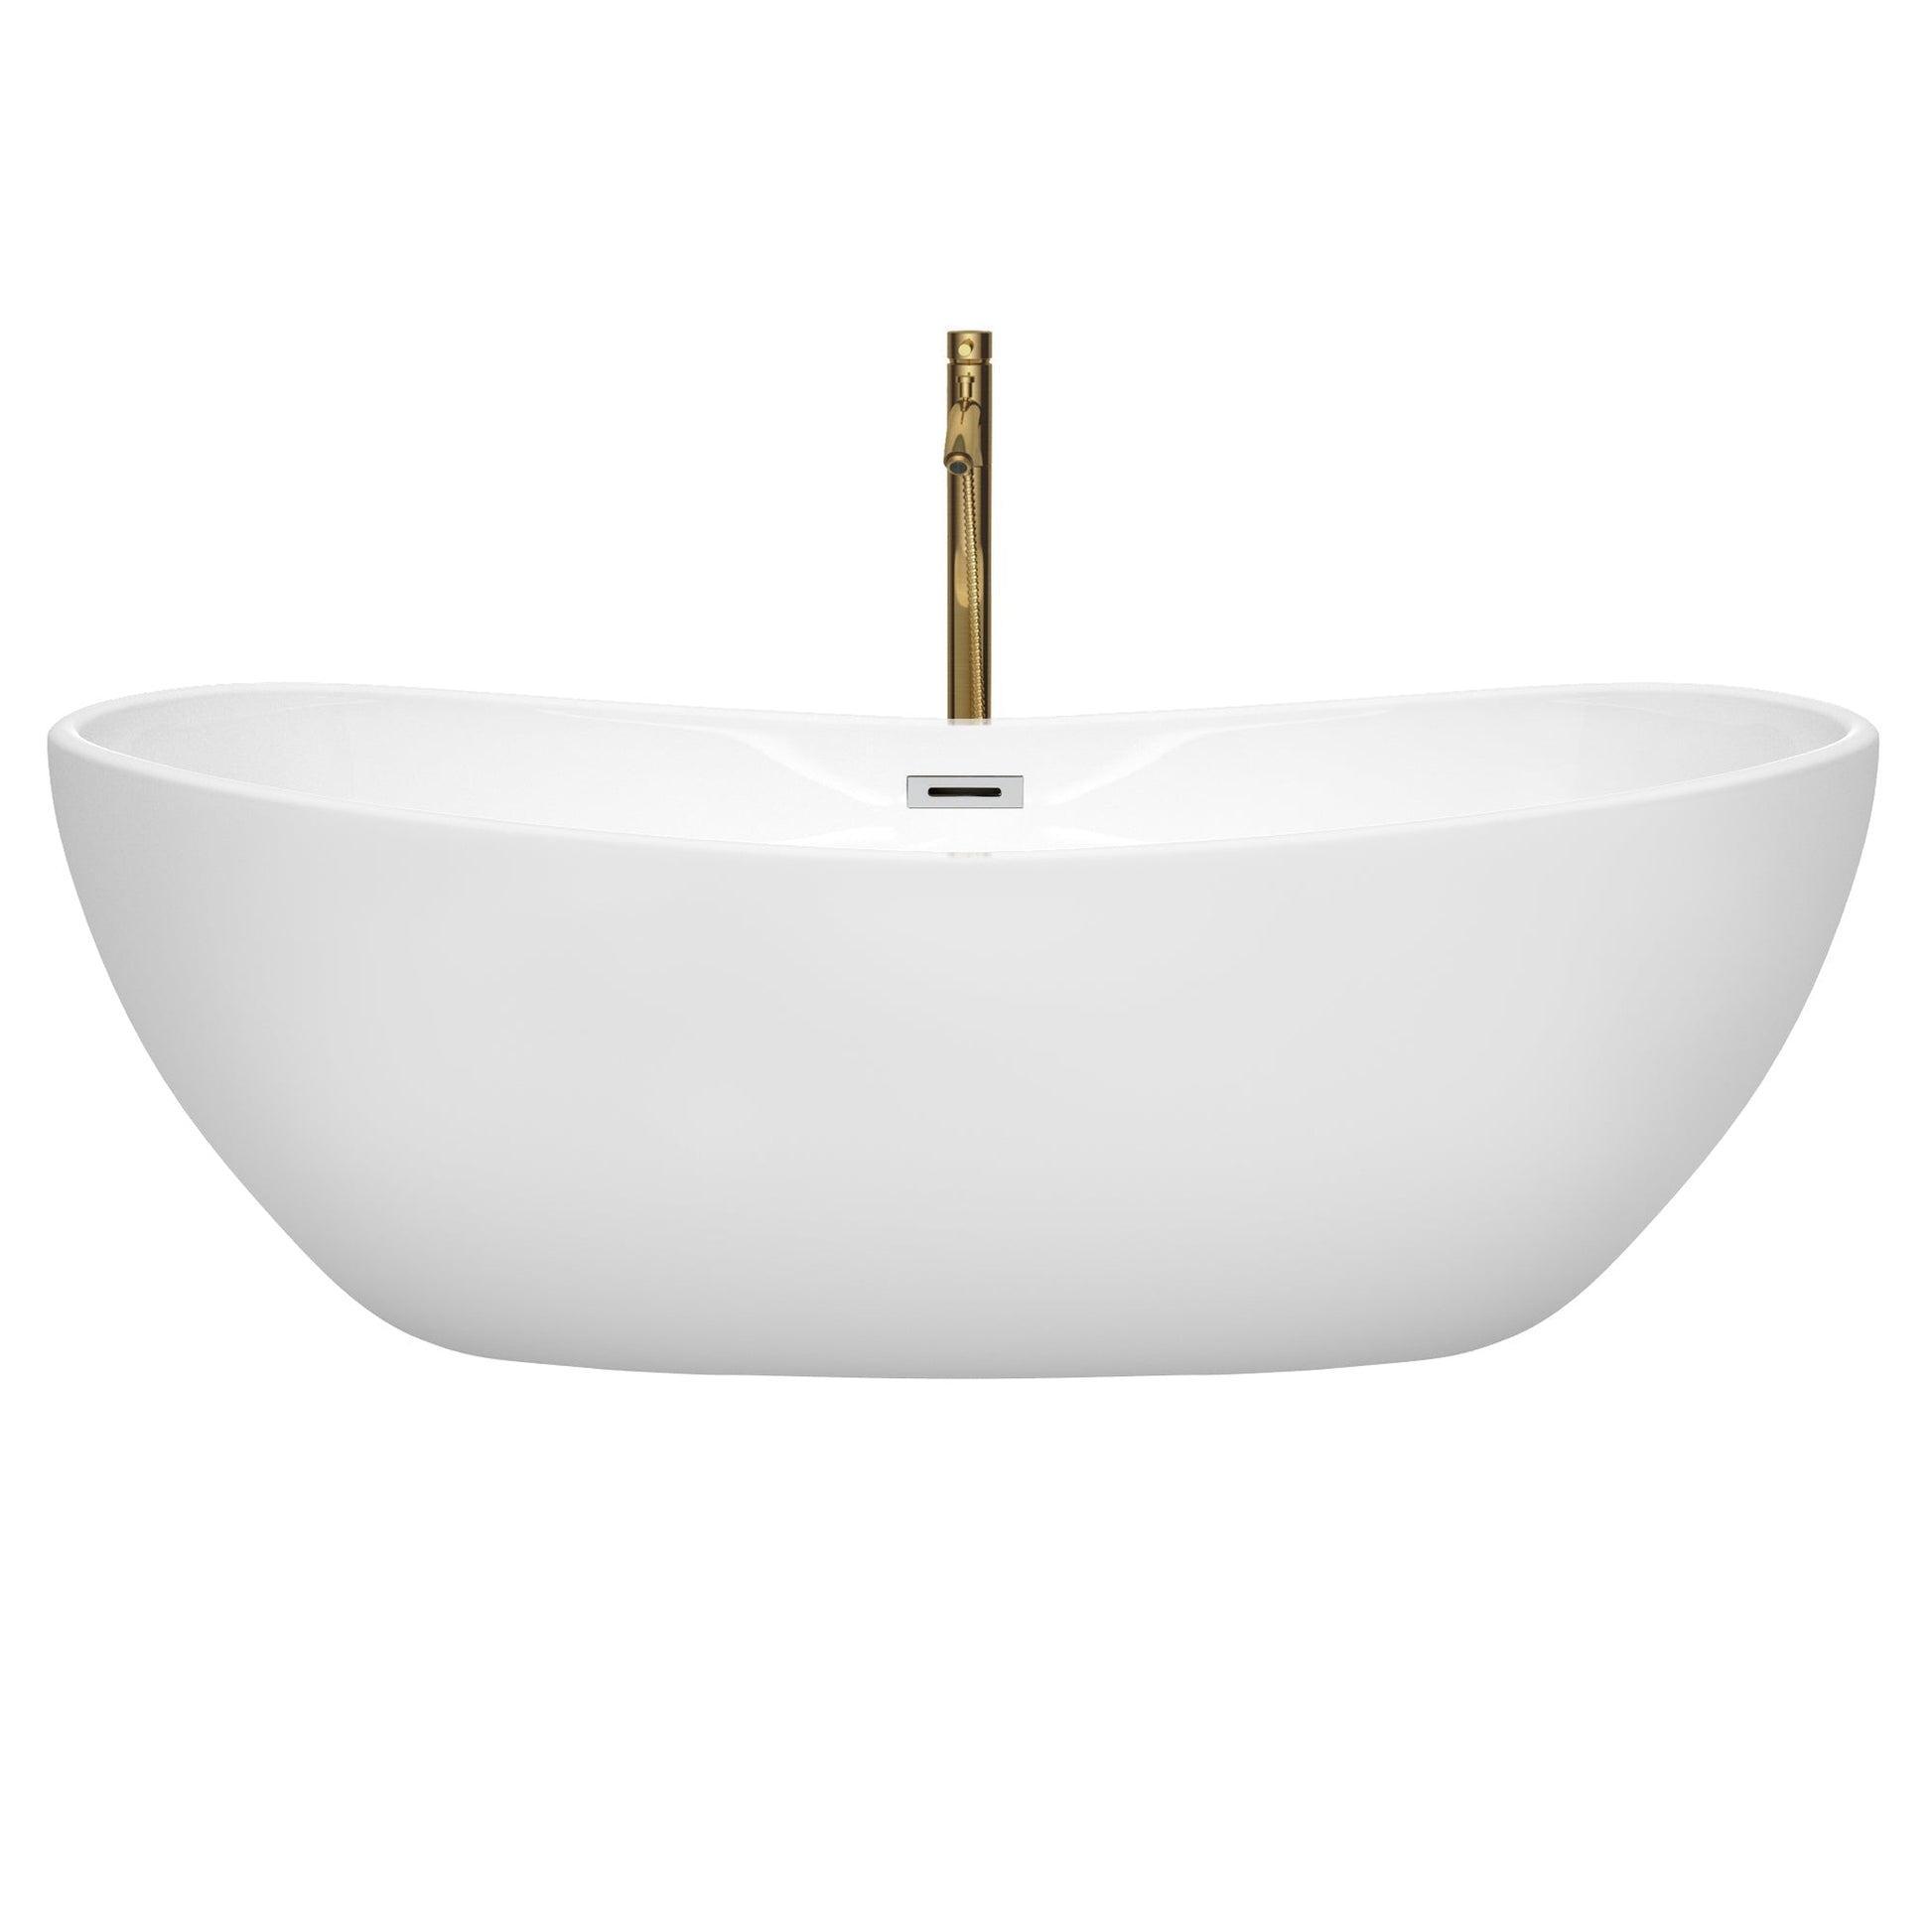 Wyndham Collection Rebecca 70" Freestanding Bathtub in White With Polished Chrome Trim and Floor Mounted Faucet in Brushed Gold